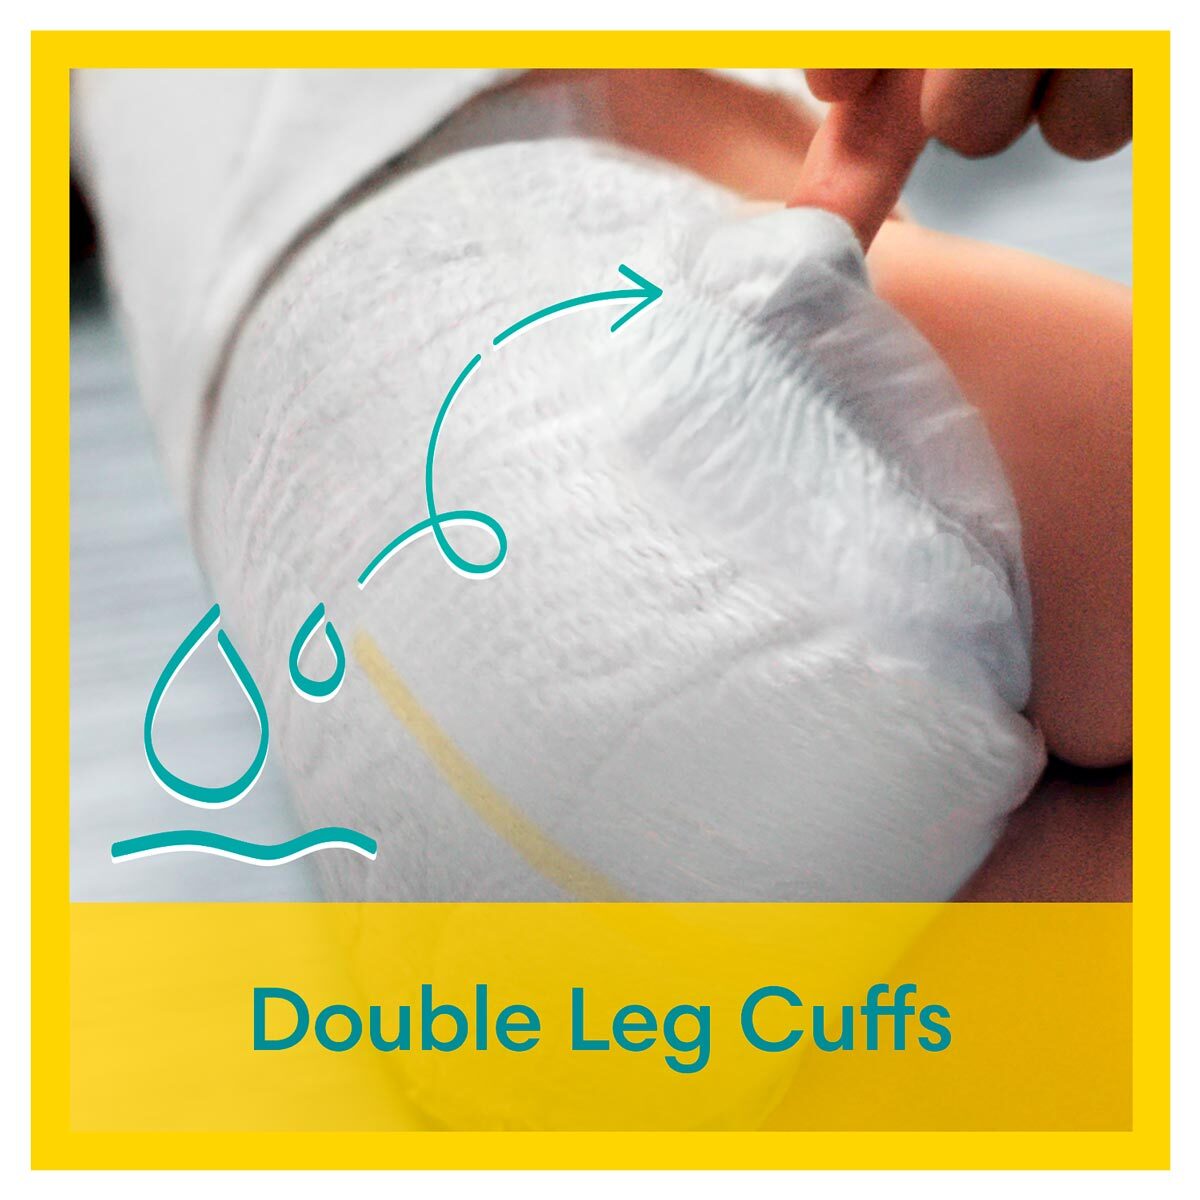 Nappies have Double Leg Cuffs